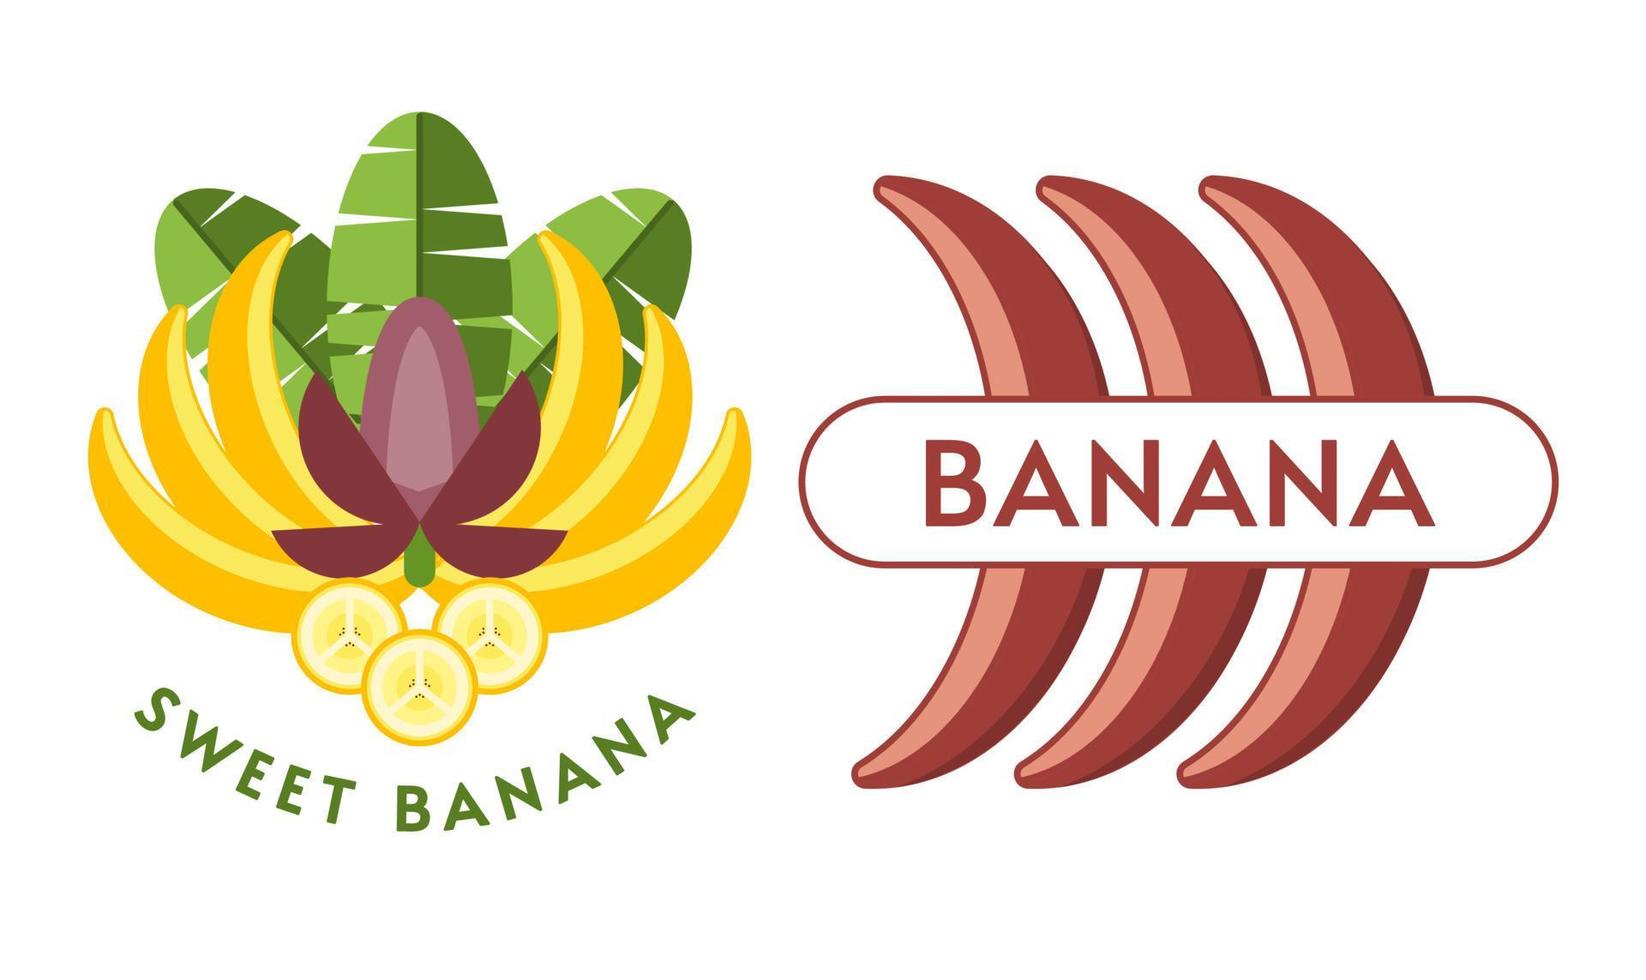 Set of logos, emblems, badges with yellow, red bananas, banana flowers, leaves, slices, bunch of bananas. Isolated vector illustration. Good for decoration of food package, creation of stickers